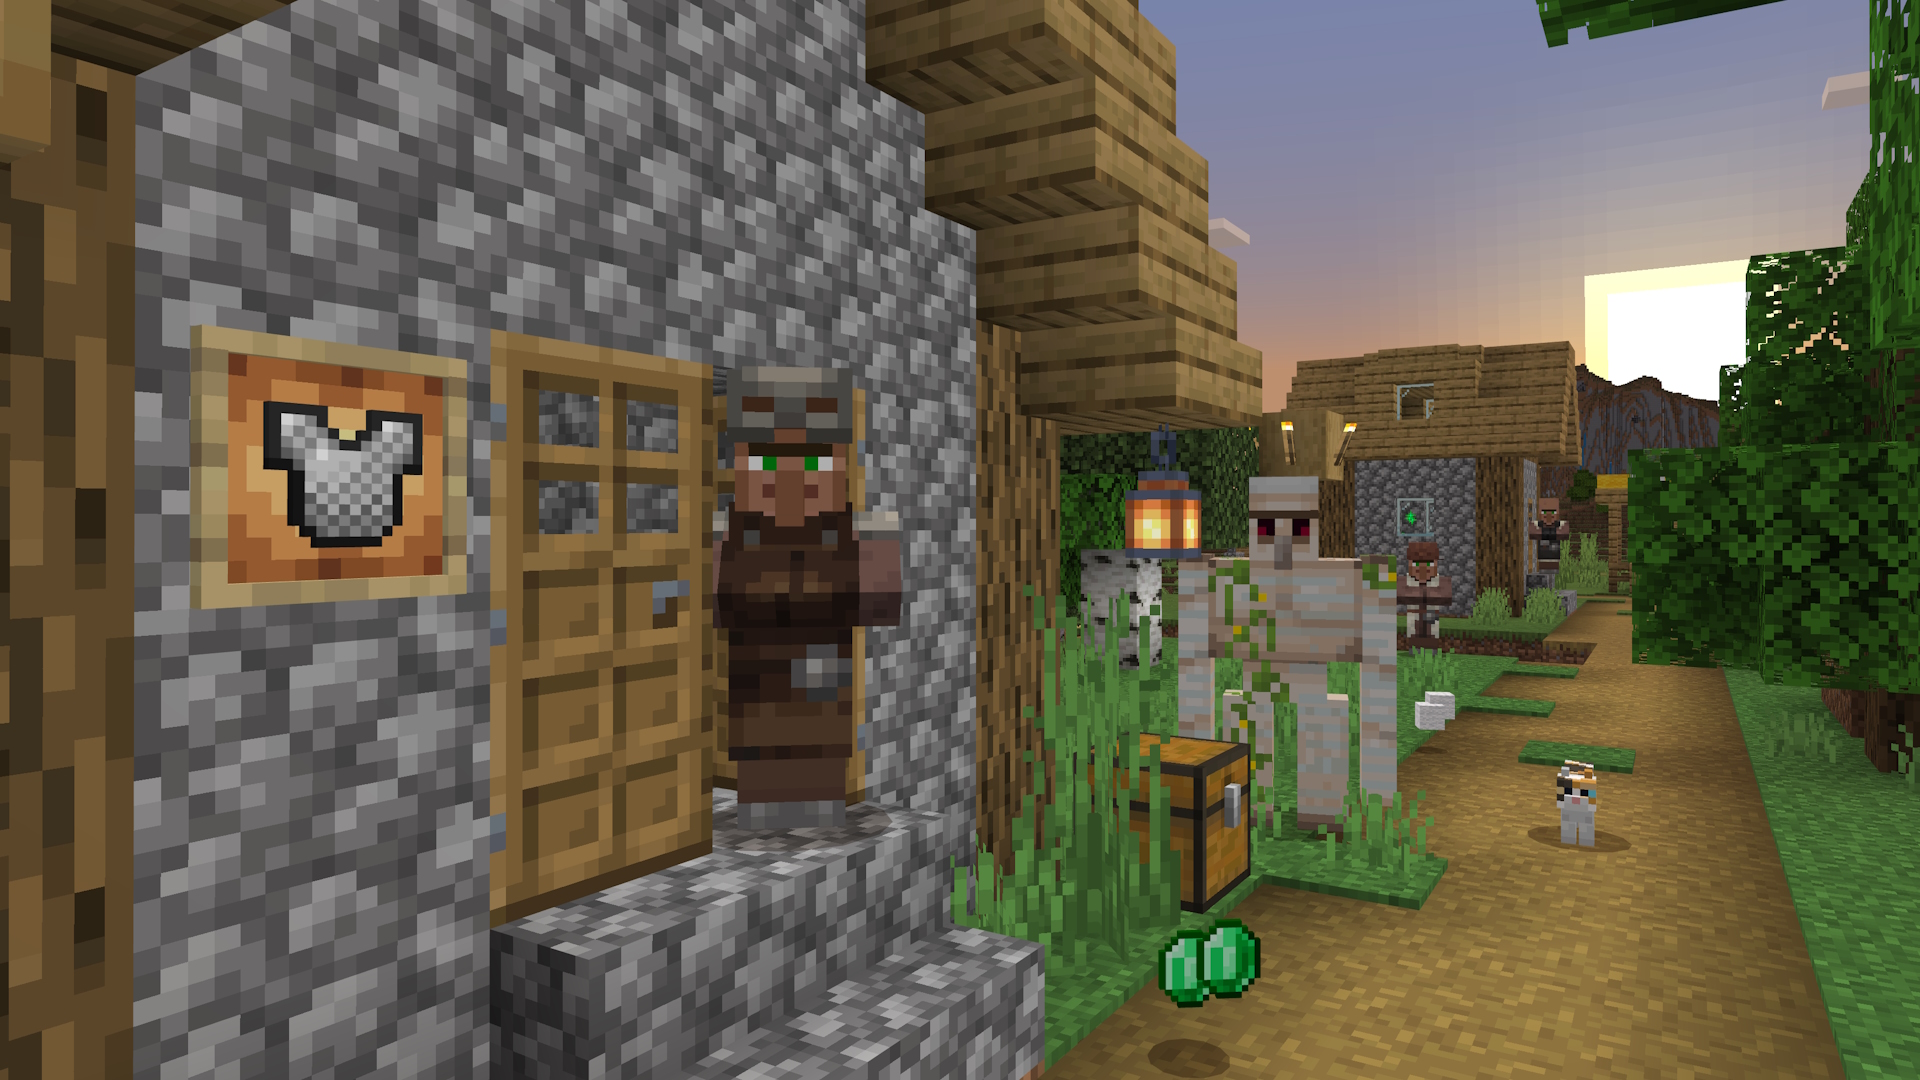 An armorer villager standing in a doorway. Also seen in the village are other villagers, an iron golem, and a cat. There are dropped emeralds on the floor near a chest.